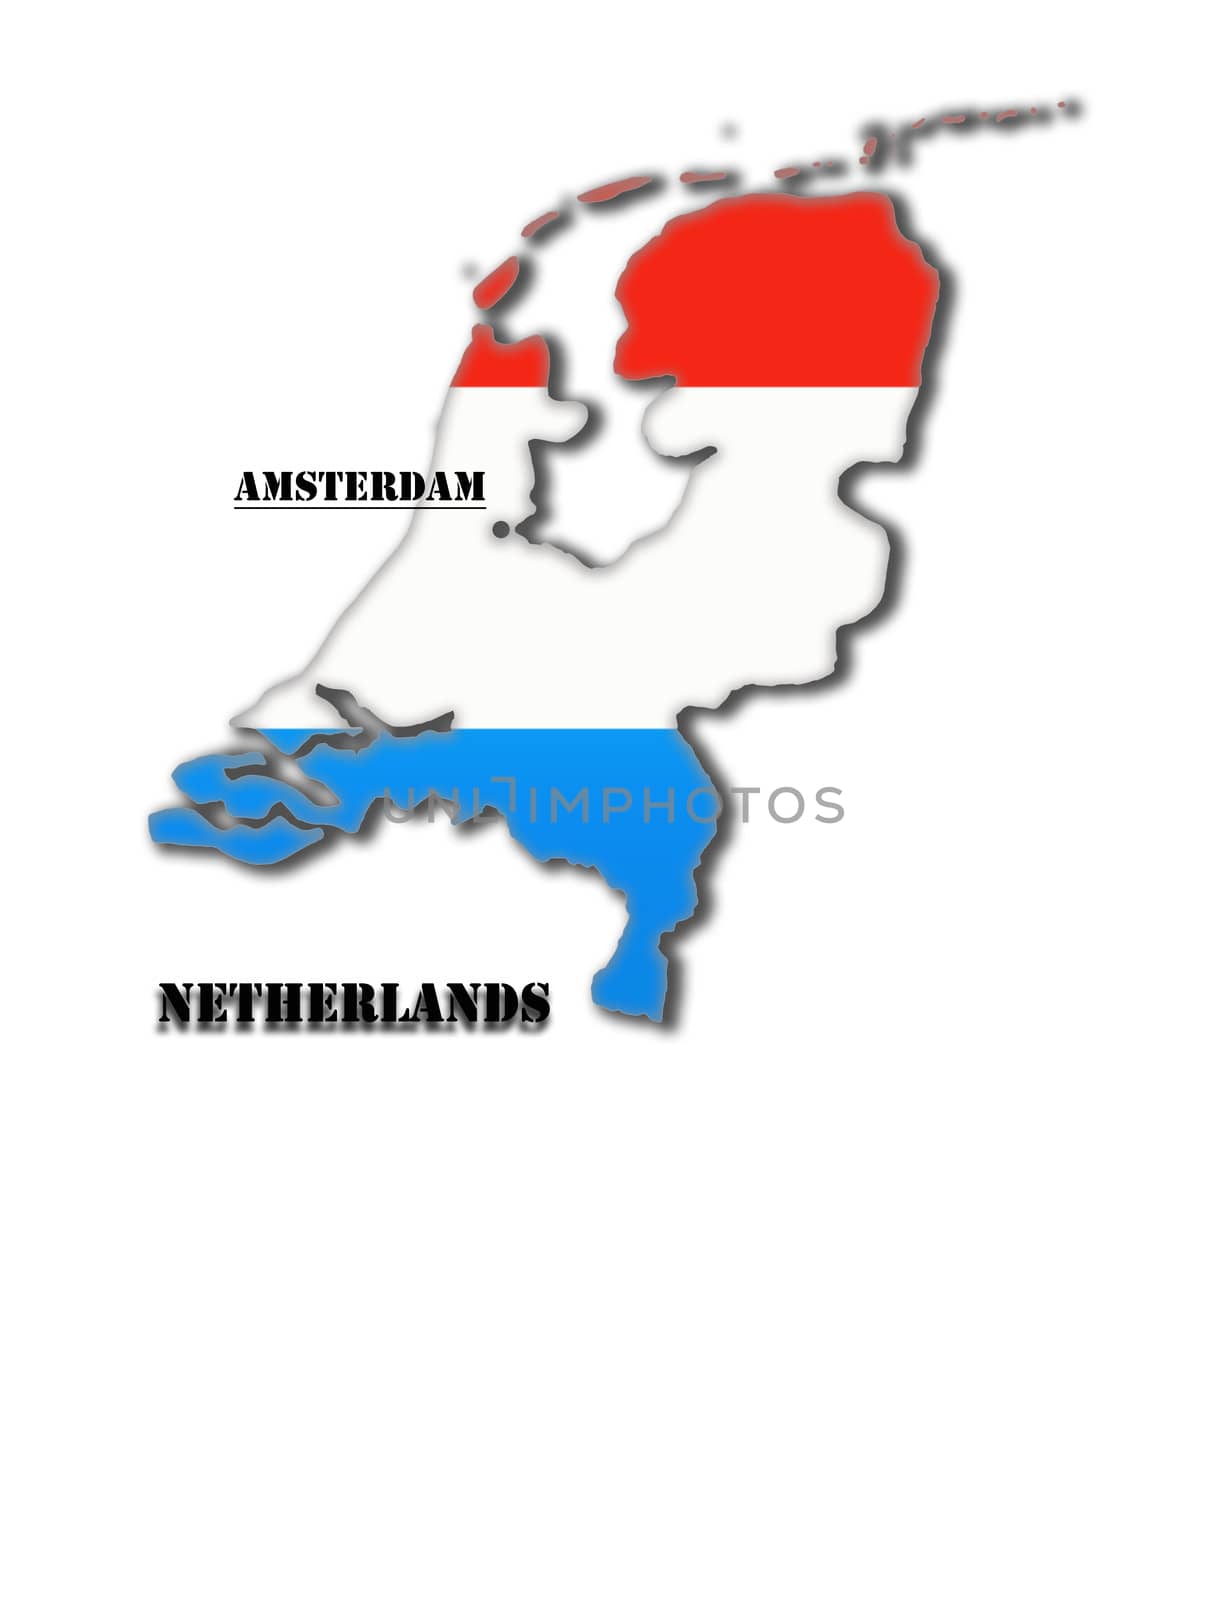 Coloured silhouette of a map of Holland with capital